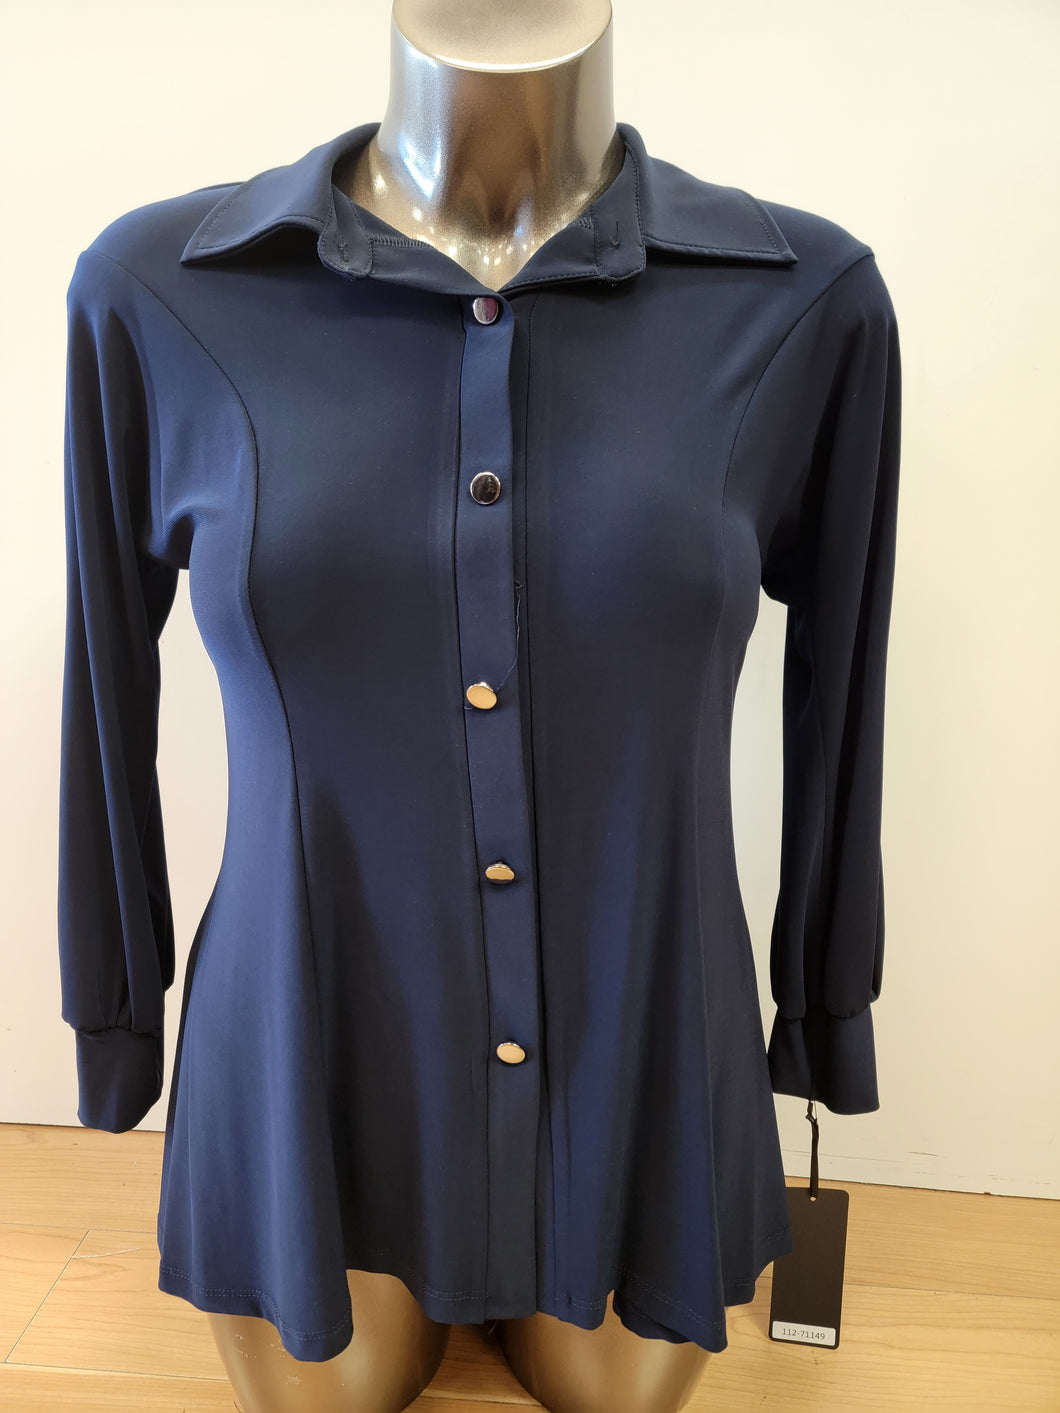 Collared Blouse by Artex available in plus sizes